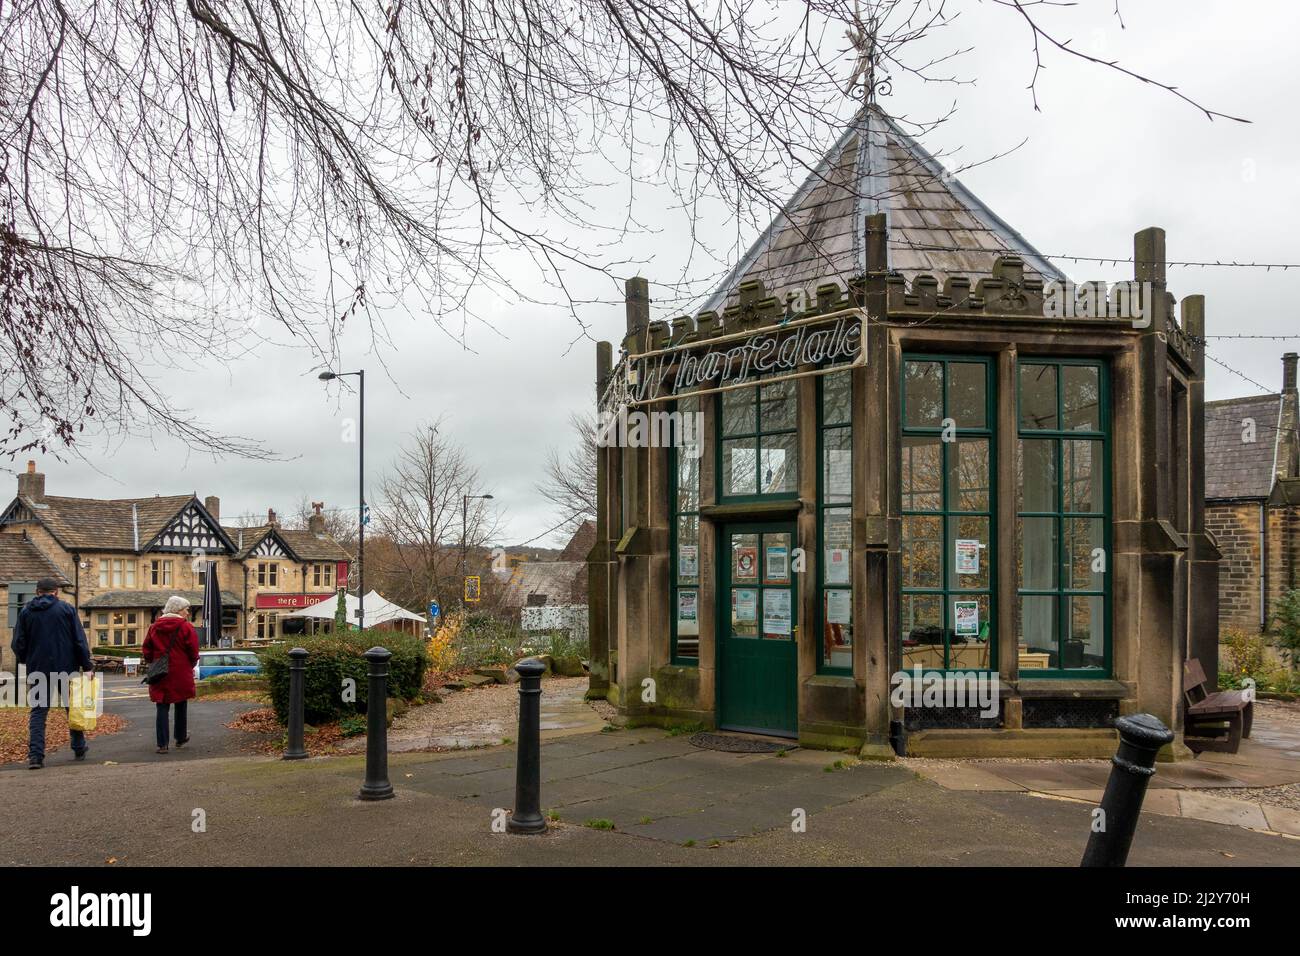 Burley-in-Wharfedale village centre with The Round House in the foreground and The Red Lion pub in the background. West Yorkshire, UK Stock Photo